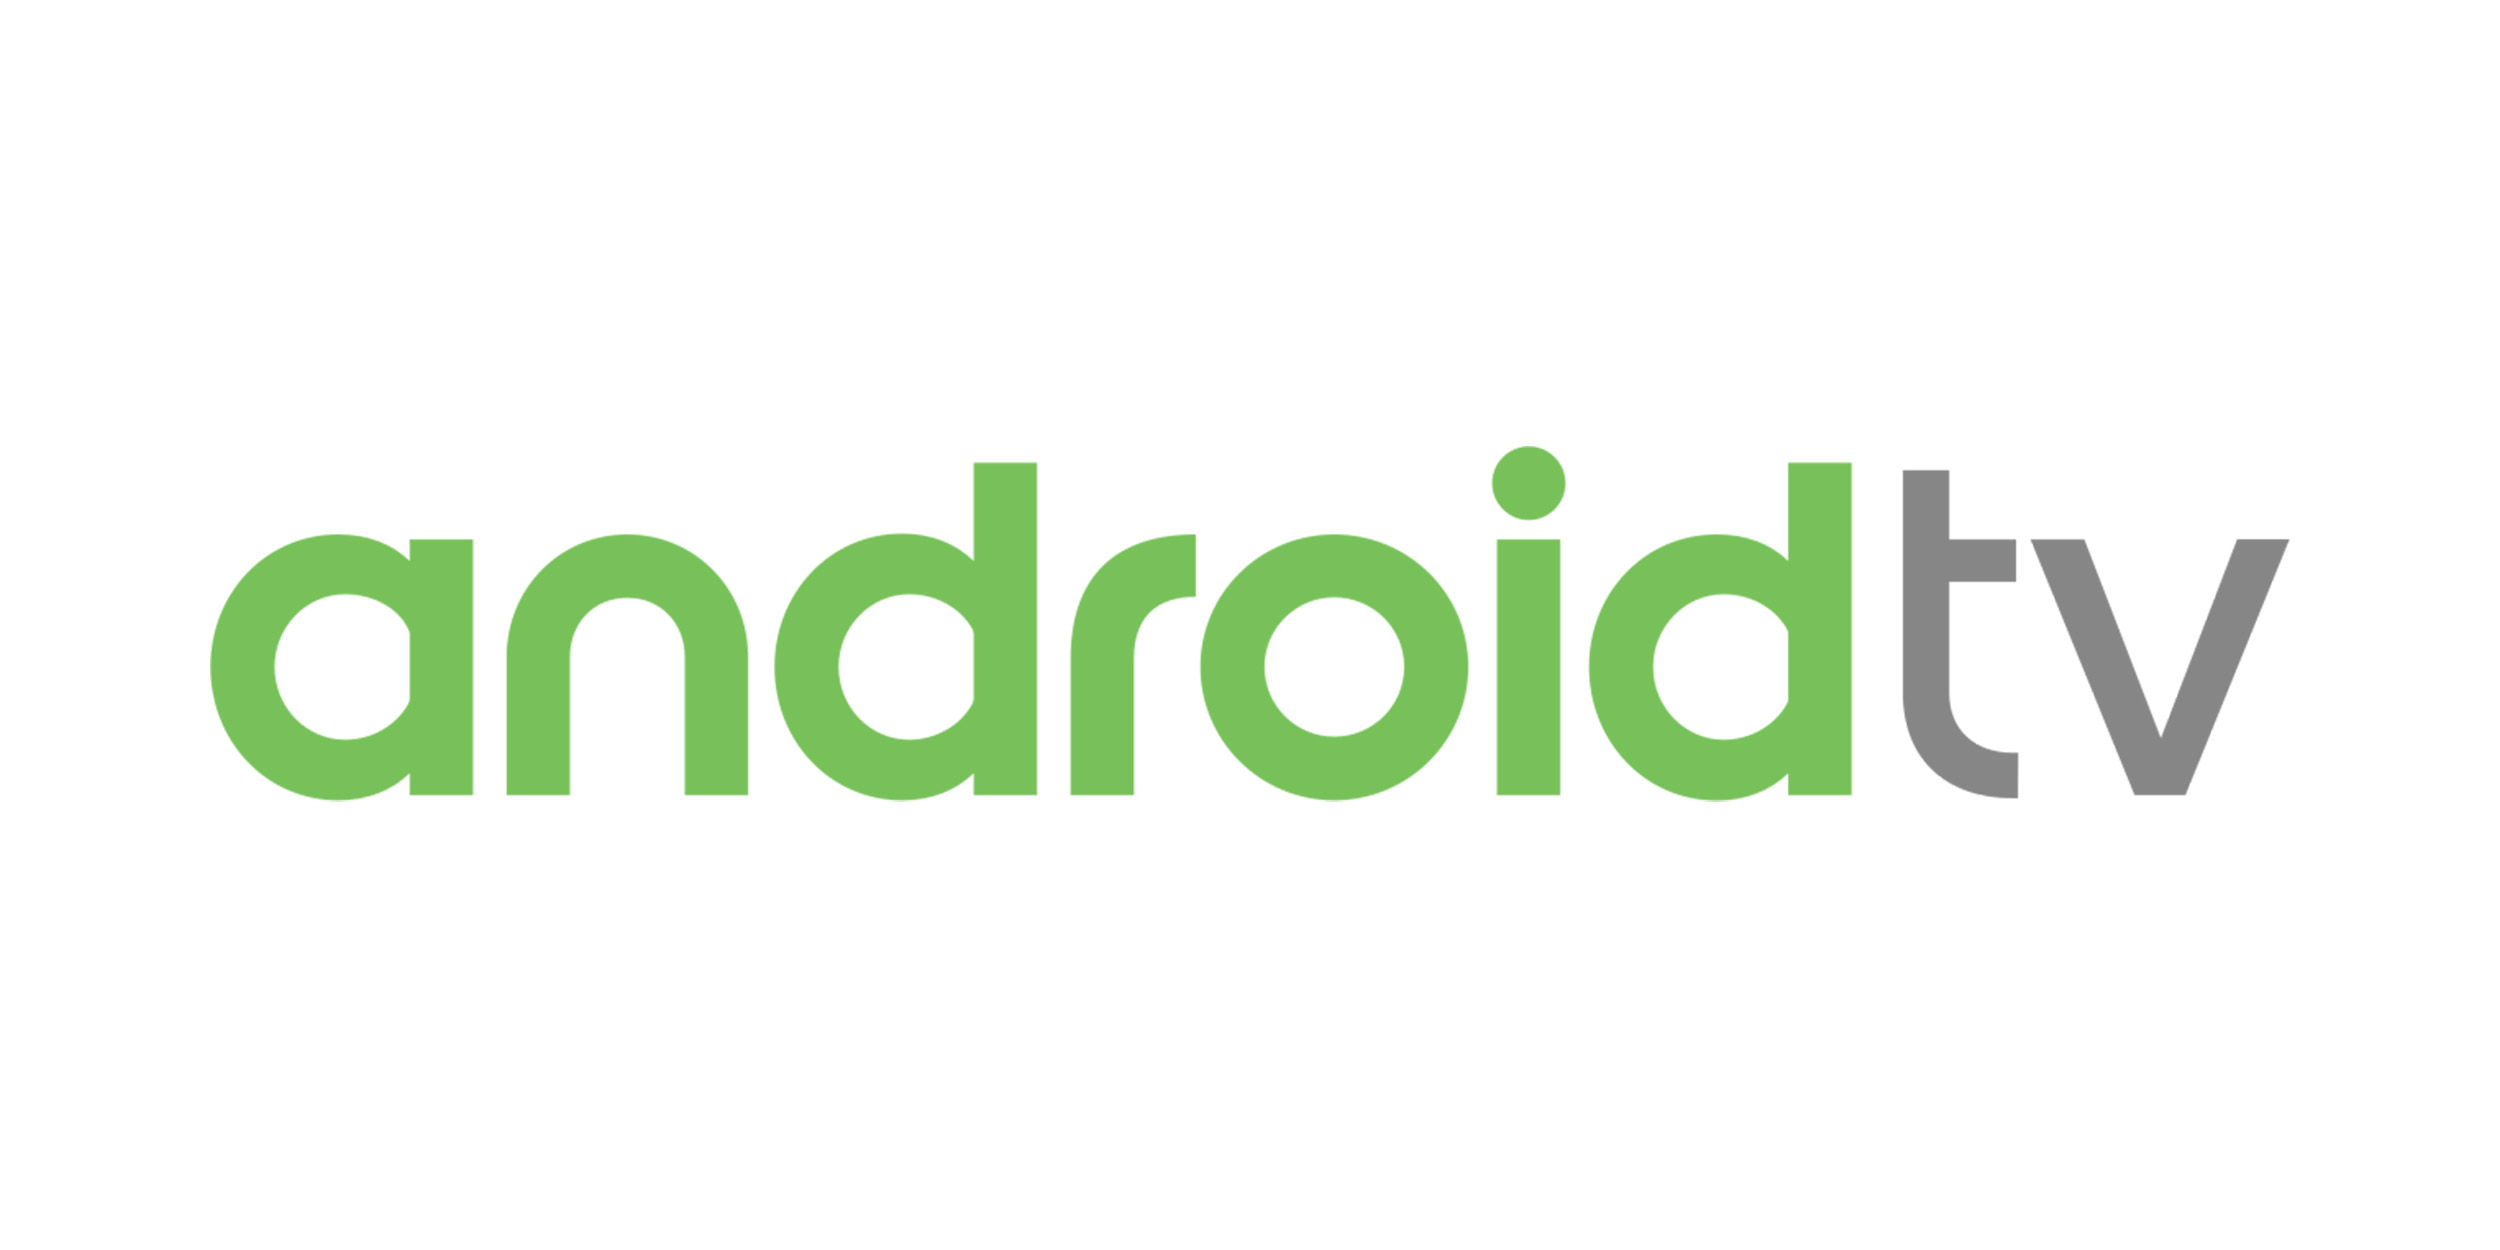 Google New Android Tv Hardware Coming 5 000 Apps 9to5google